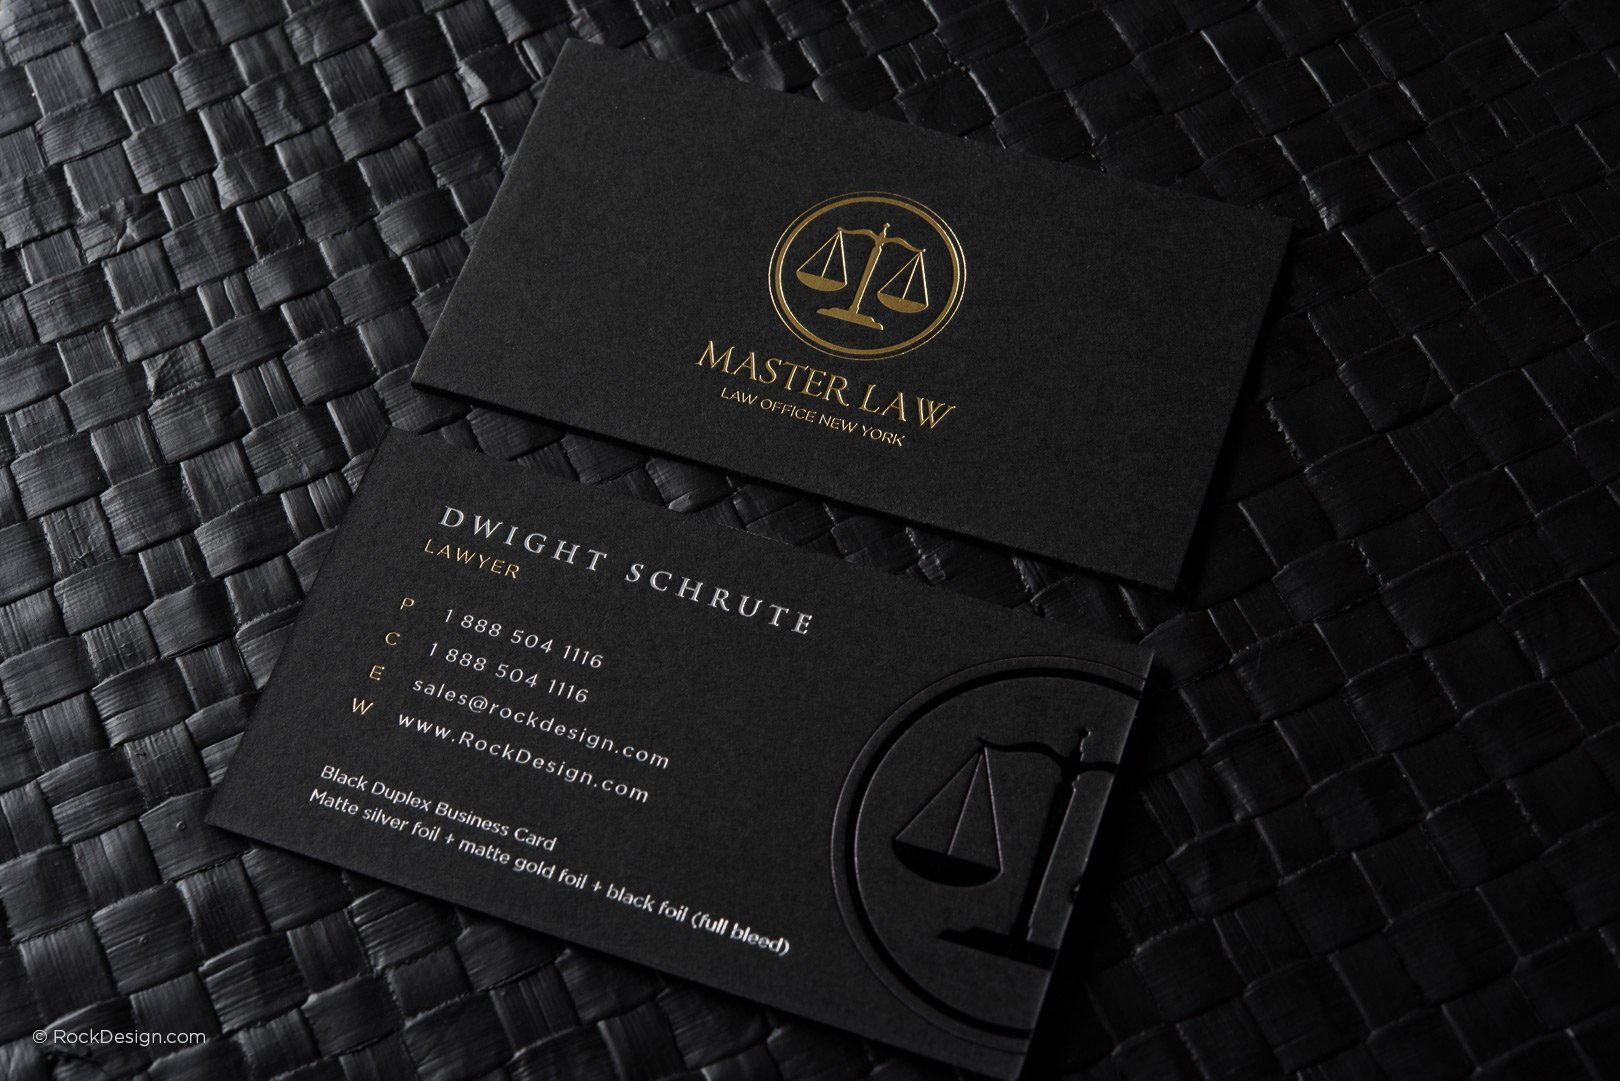 Free Lawyer Business Card Template | Rockdesign With Regard To Lawyer Business Cards Templates